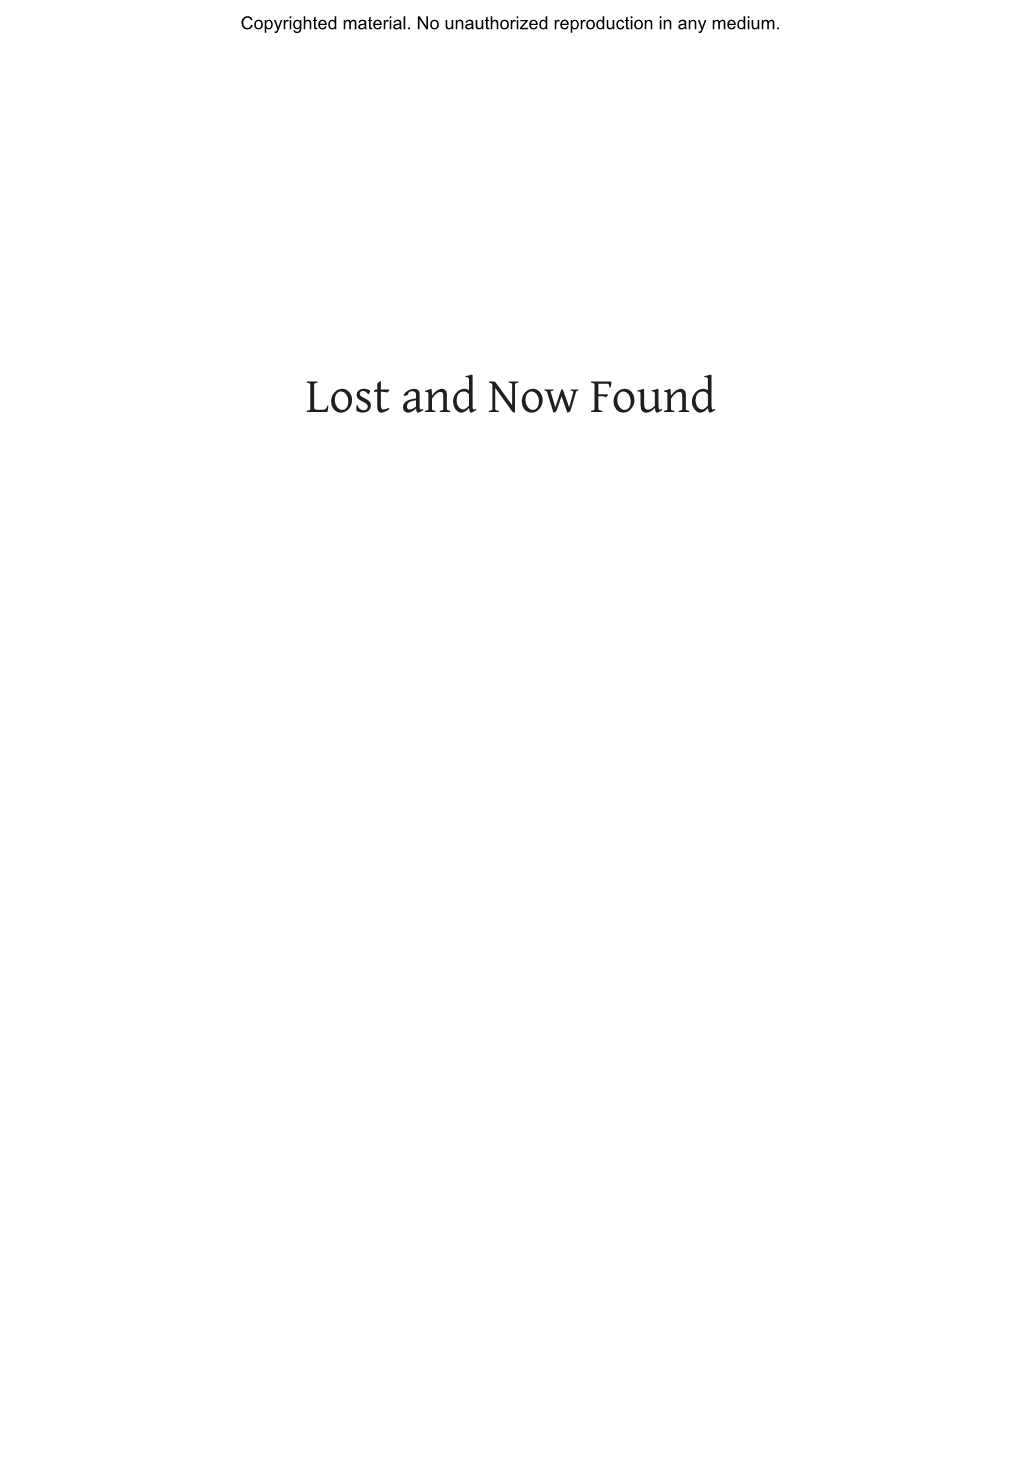 Lost and Now Found Copyrighted Material